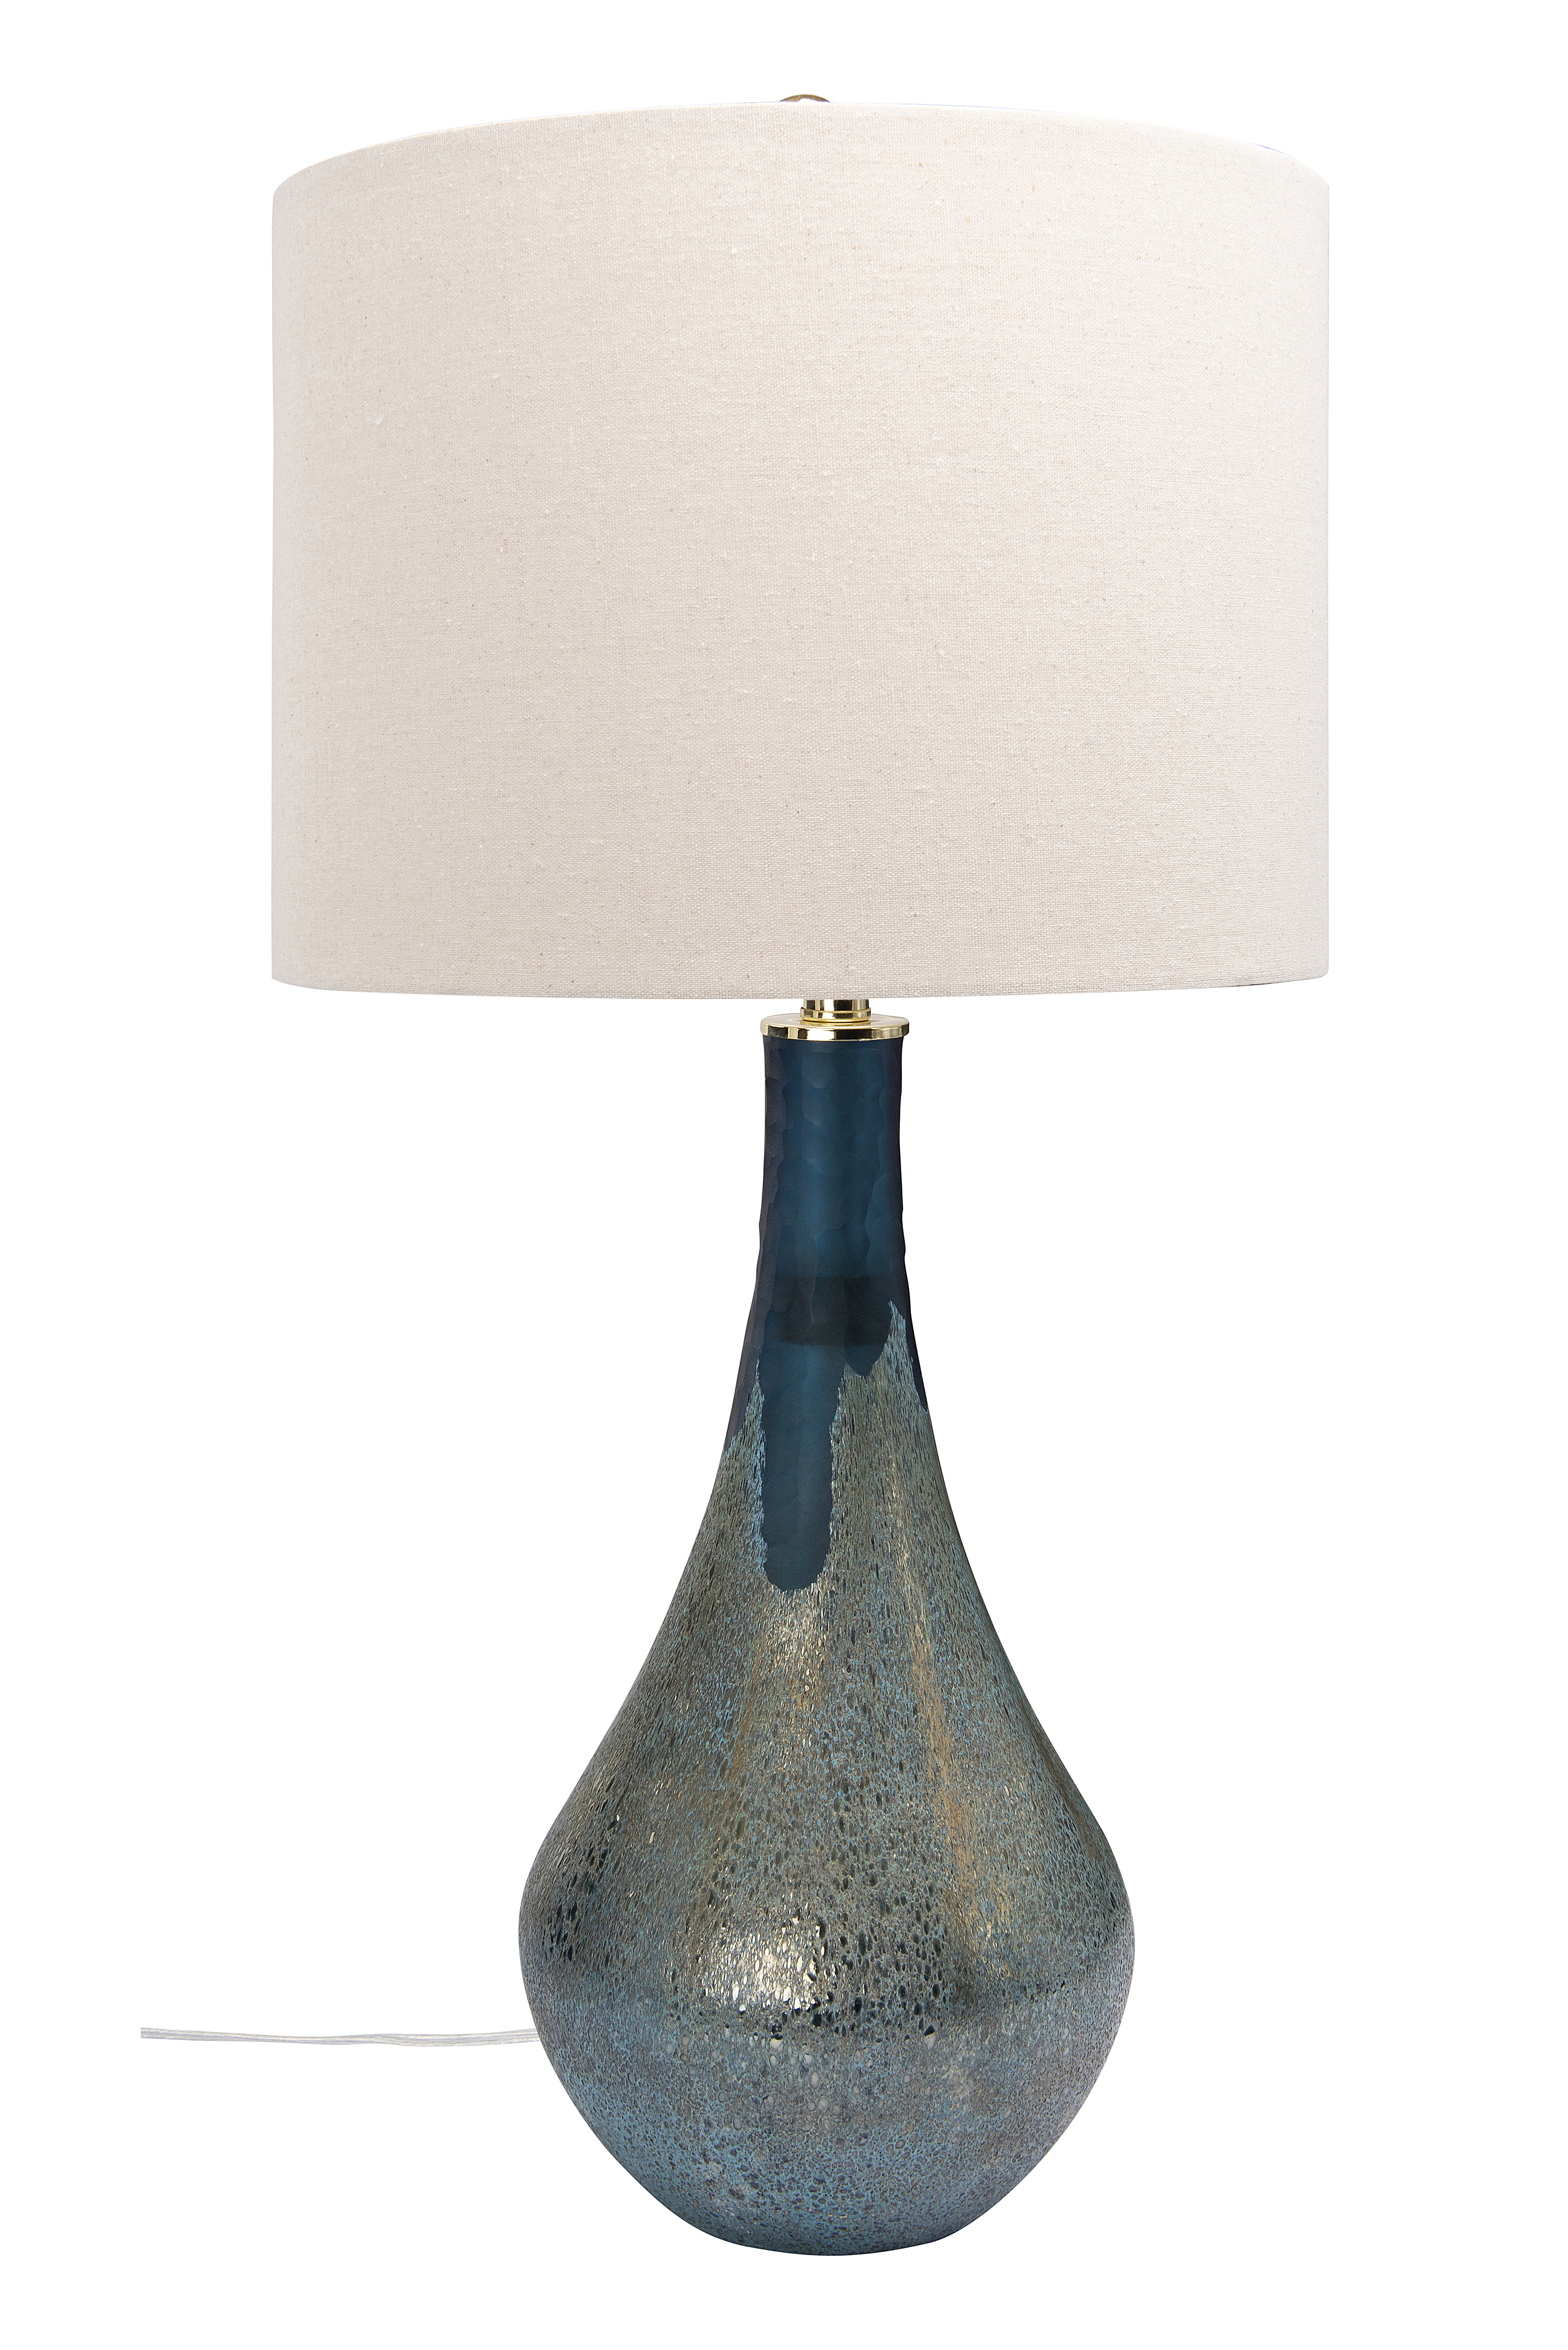 Glass Table Lamp with Opal Finish & Linen Shade - Image 0